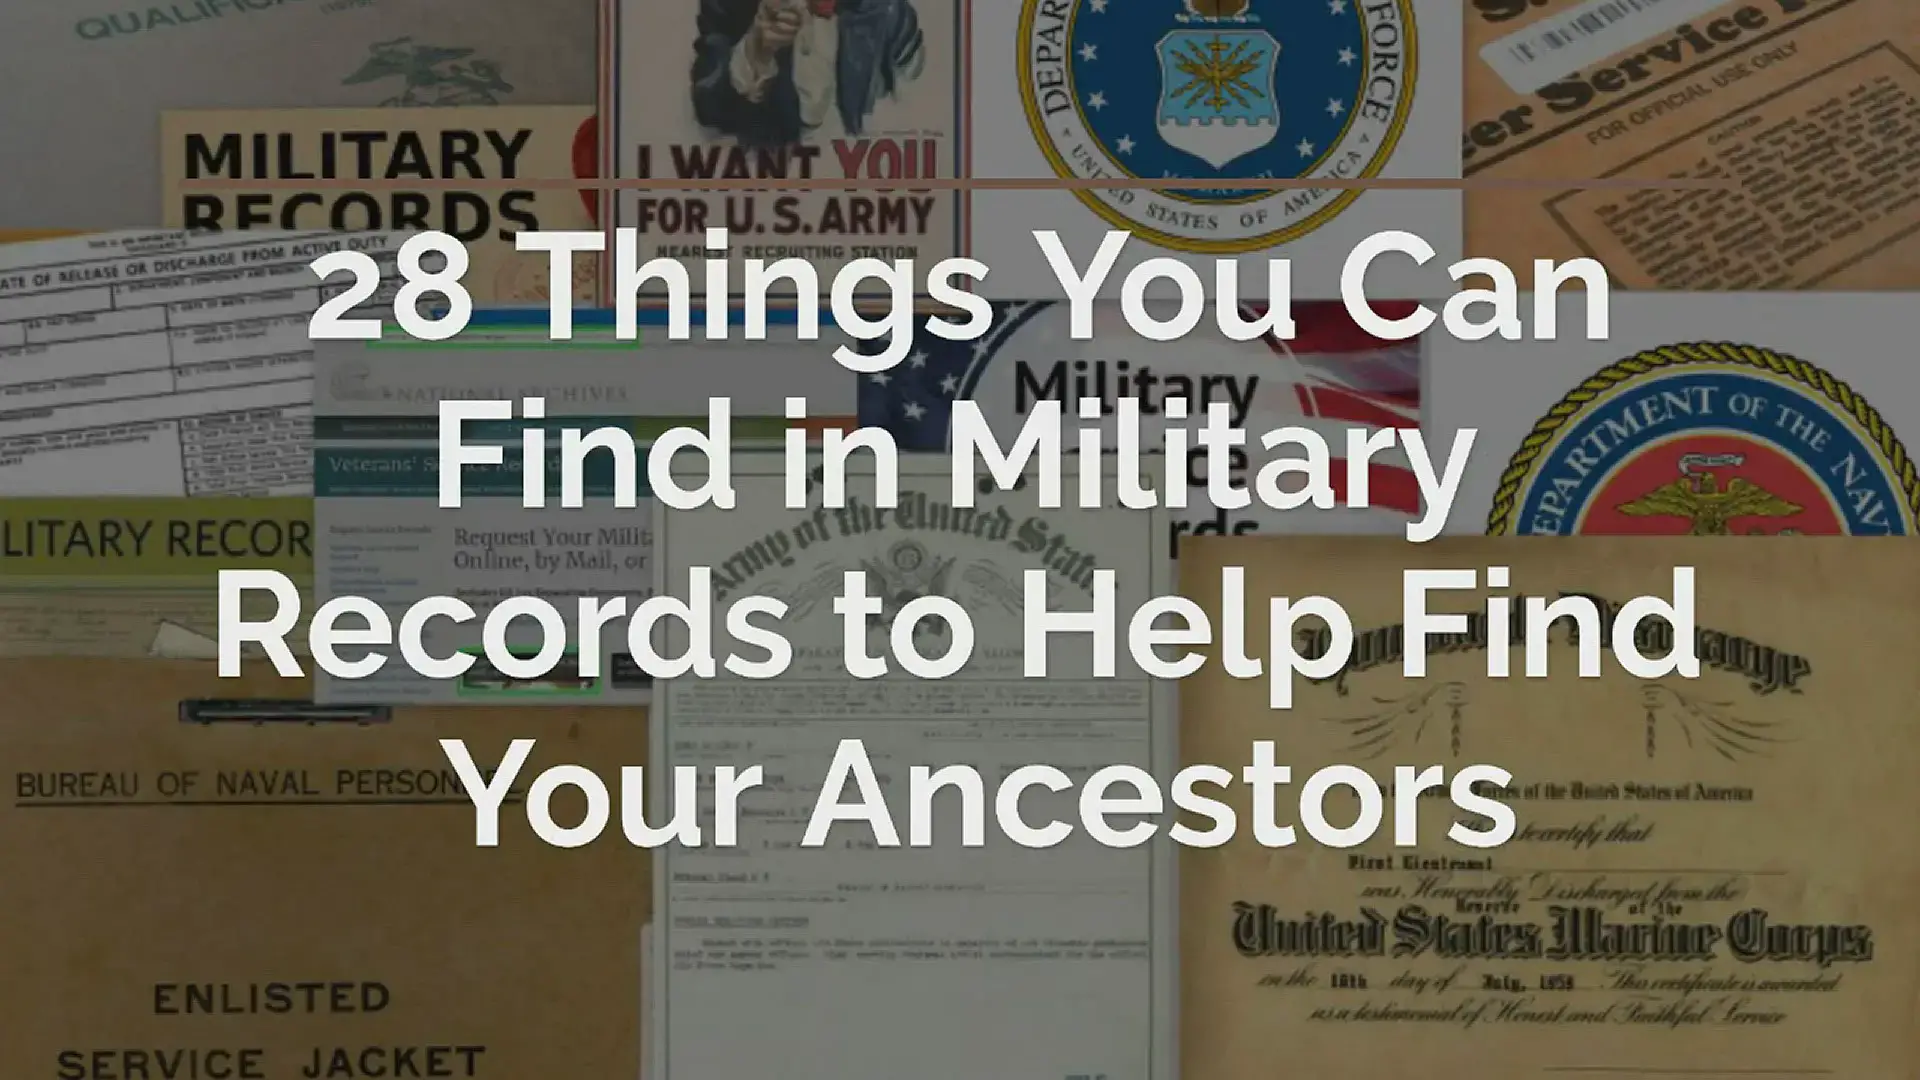 'Video thumbnail for 28 Things You Can Find in Military Records to Help Find Your Ancestors'